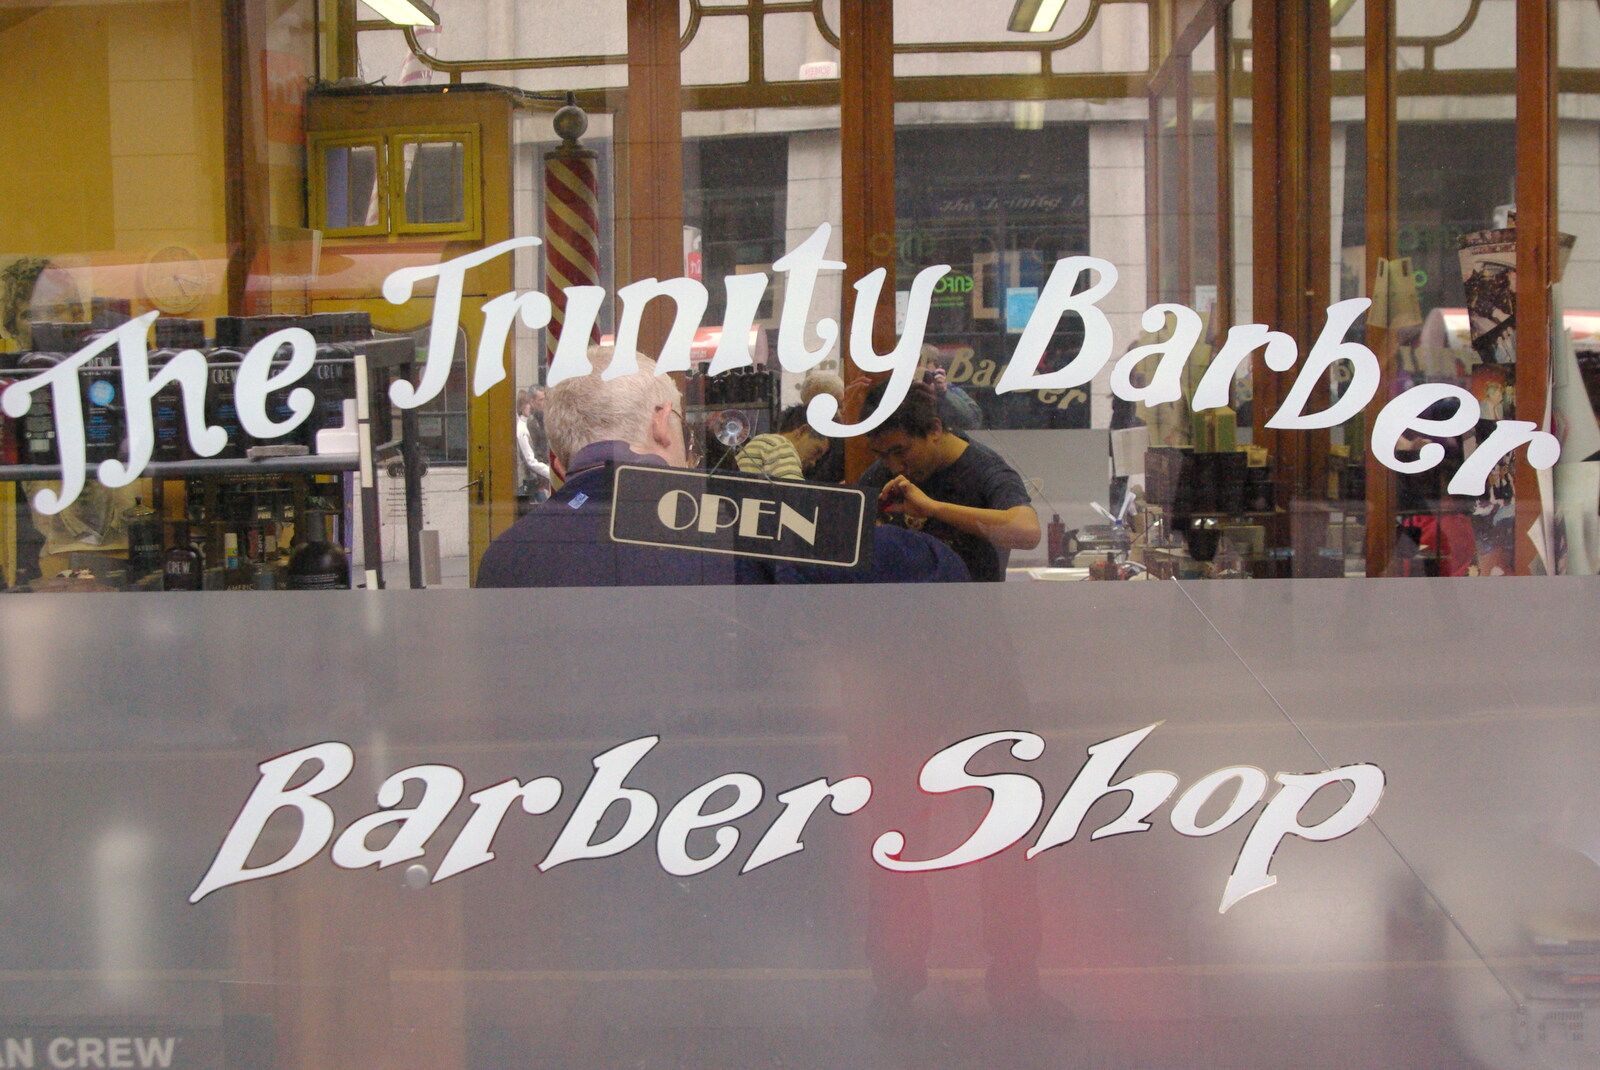 Easter in Dublin, Ireland - 21st March 2008: The Trinity Barber Shop